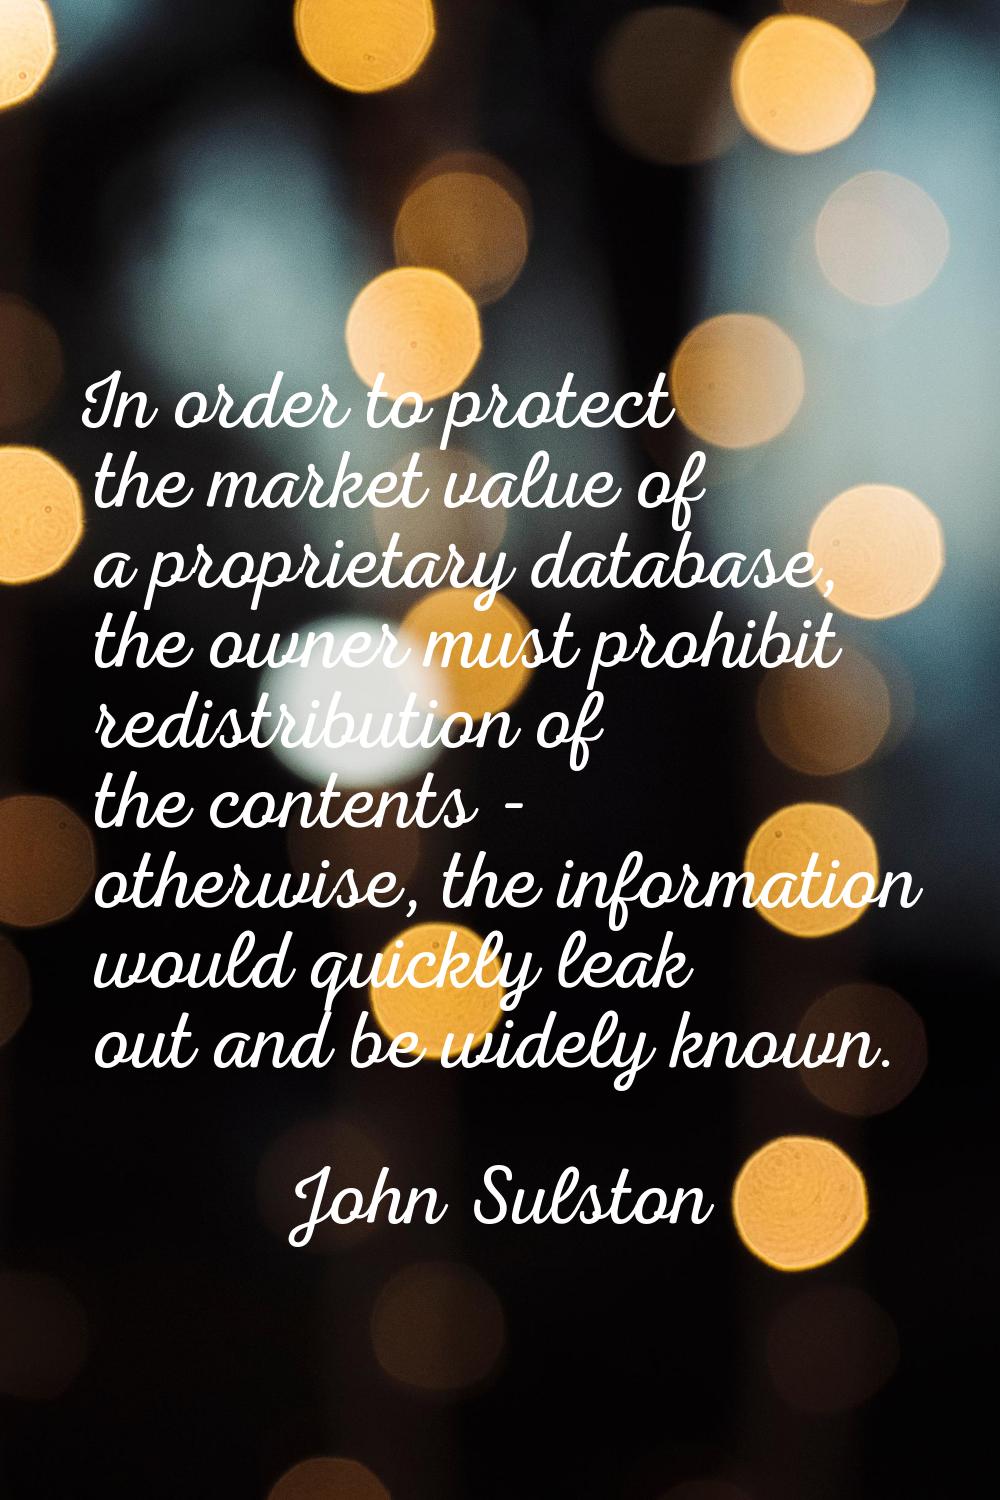 In order to protect the market value of a proprietary database, the owner must prohibit redistribut